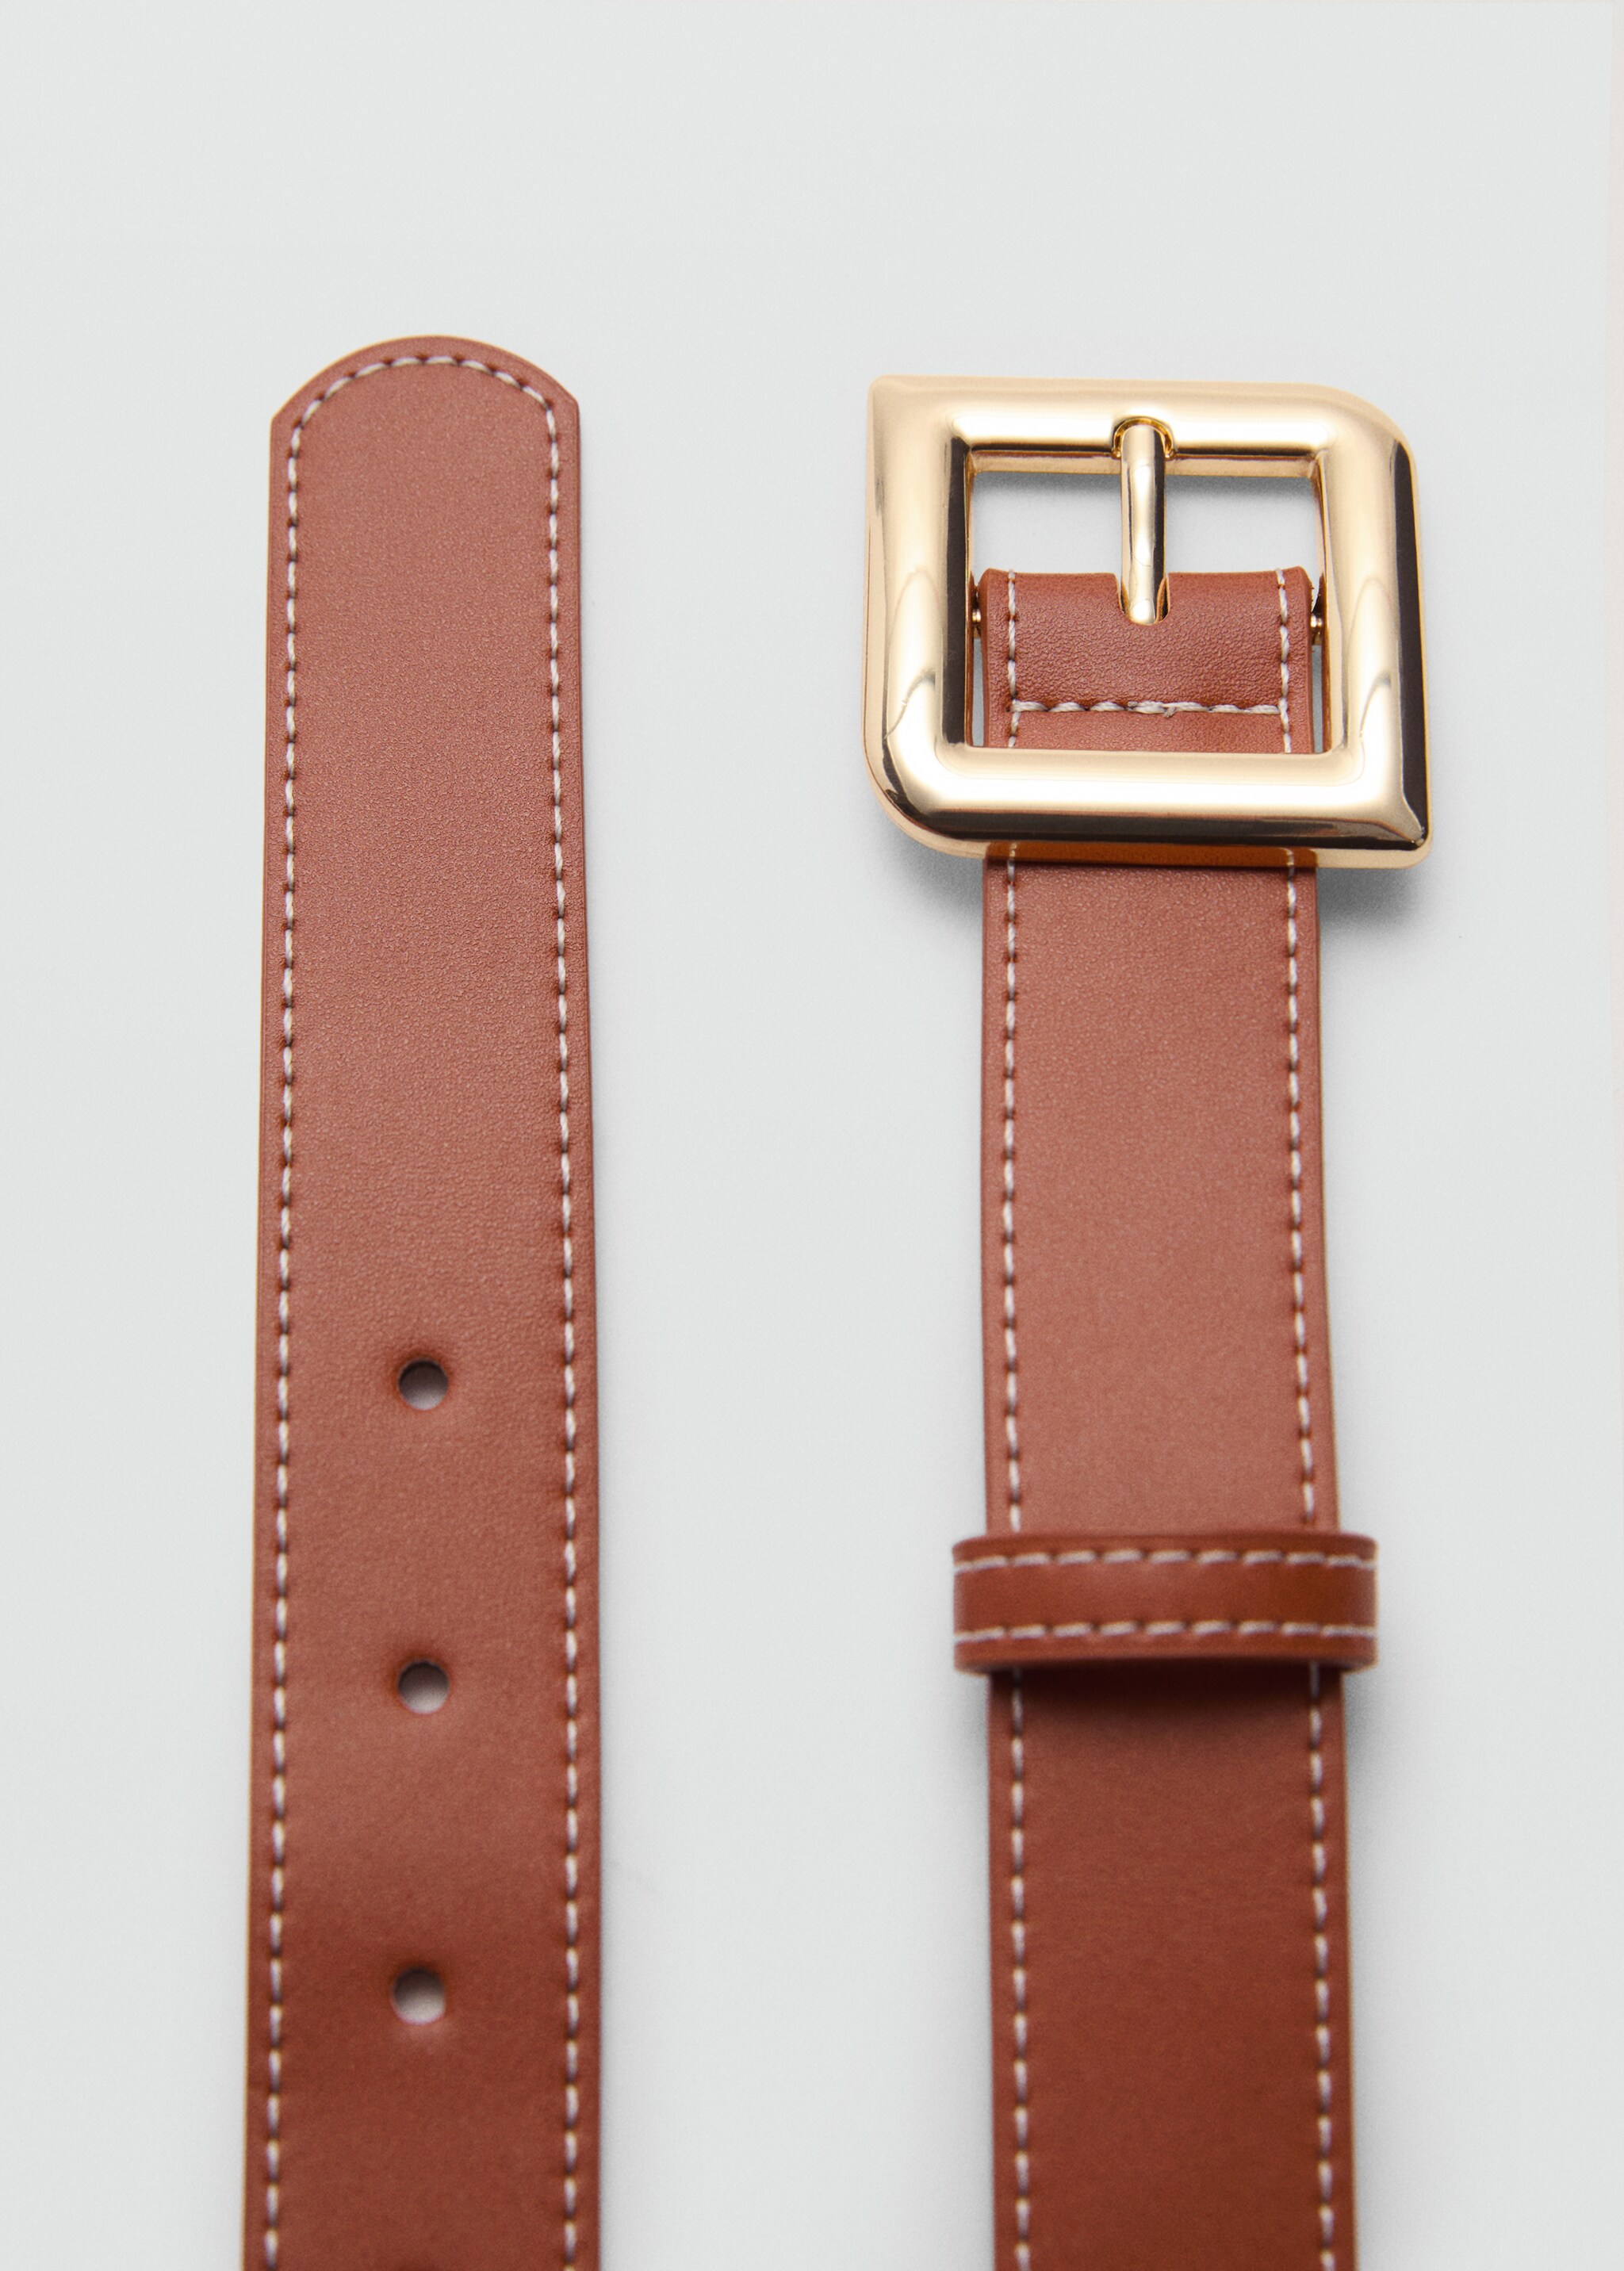 Square buckle belt - Details of the article 1